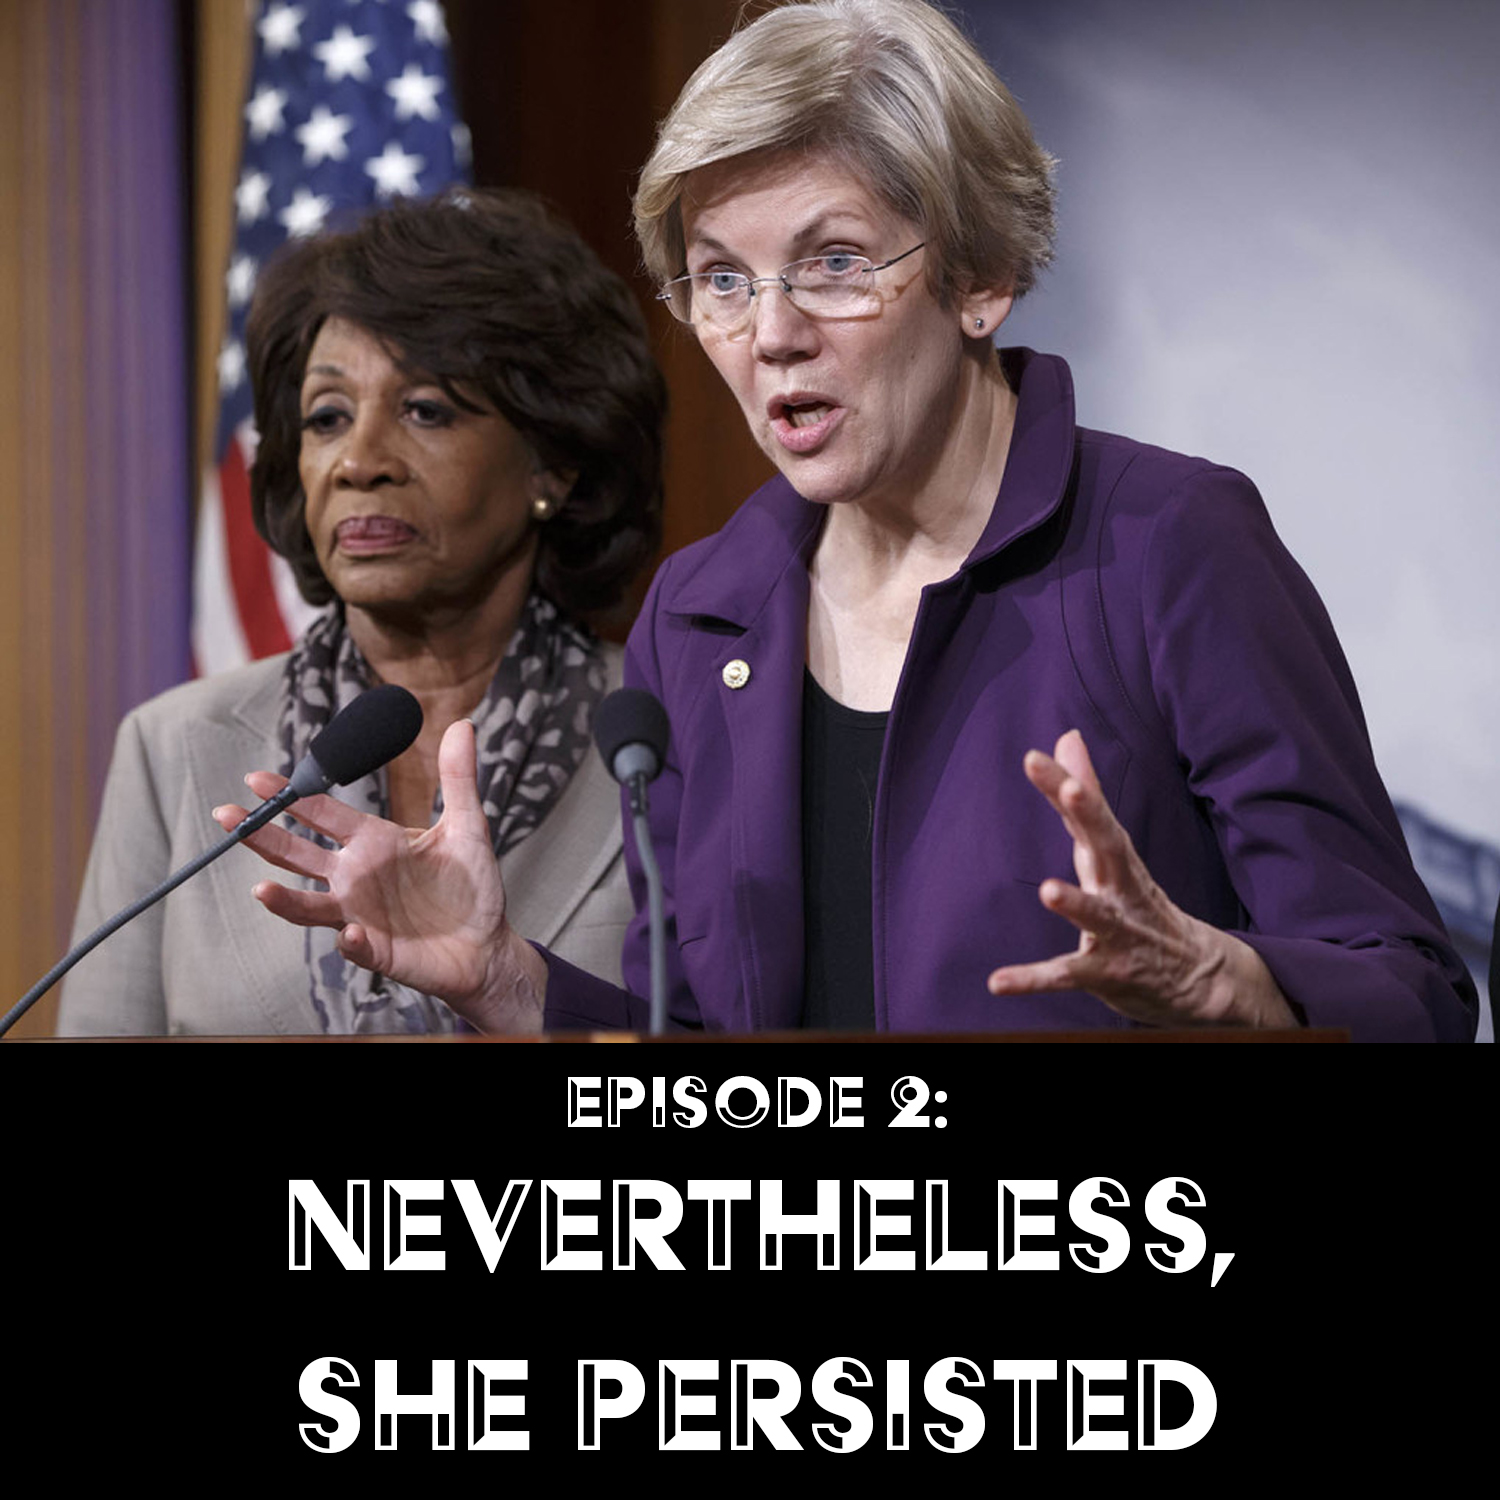 Episode 2: Nevertheless, She Persisted